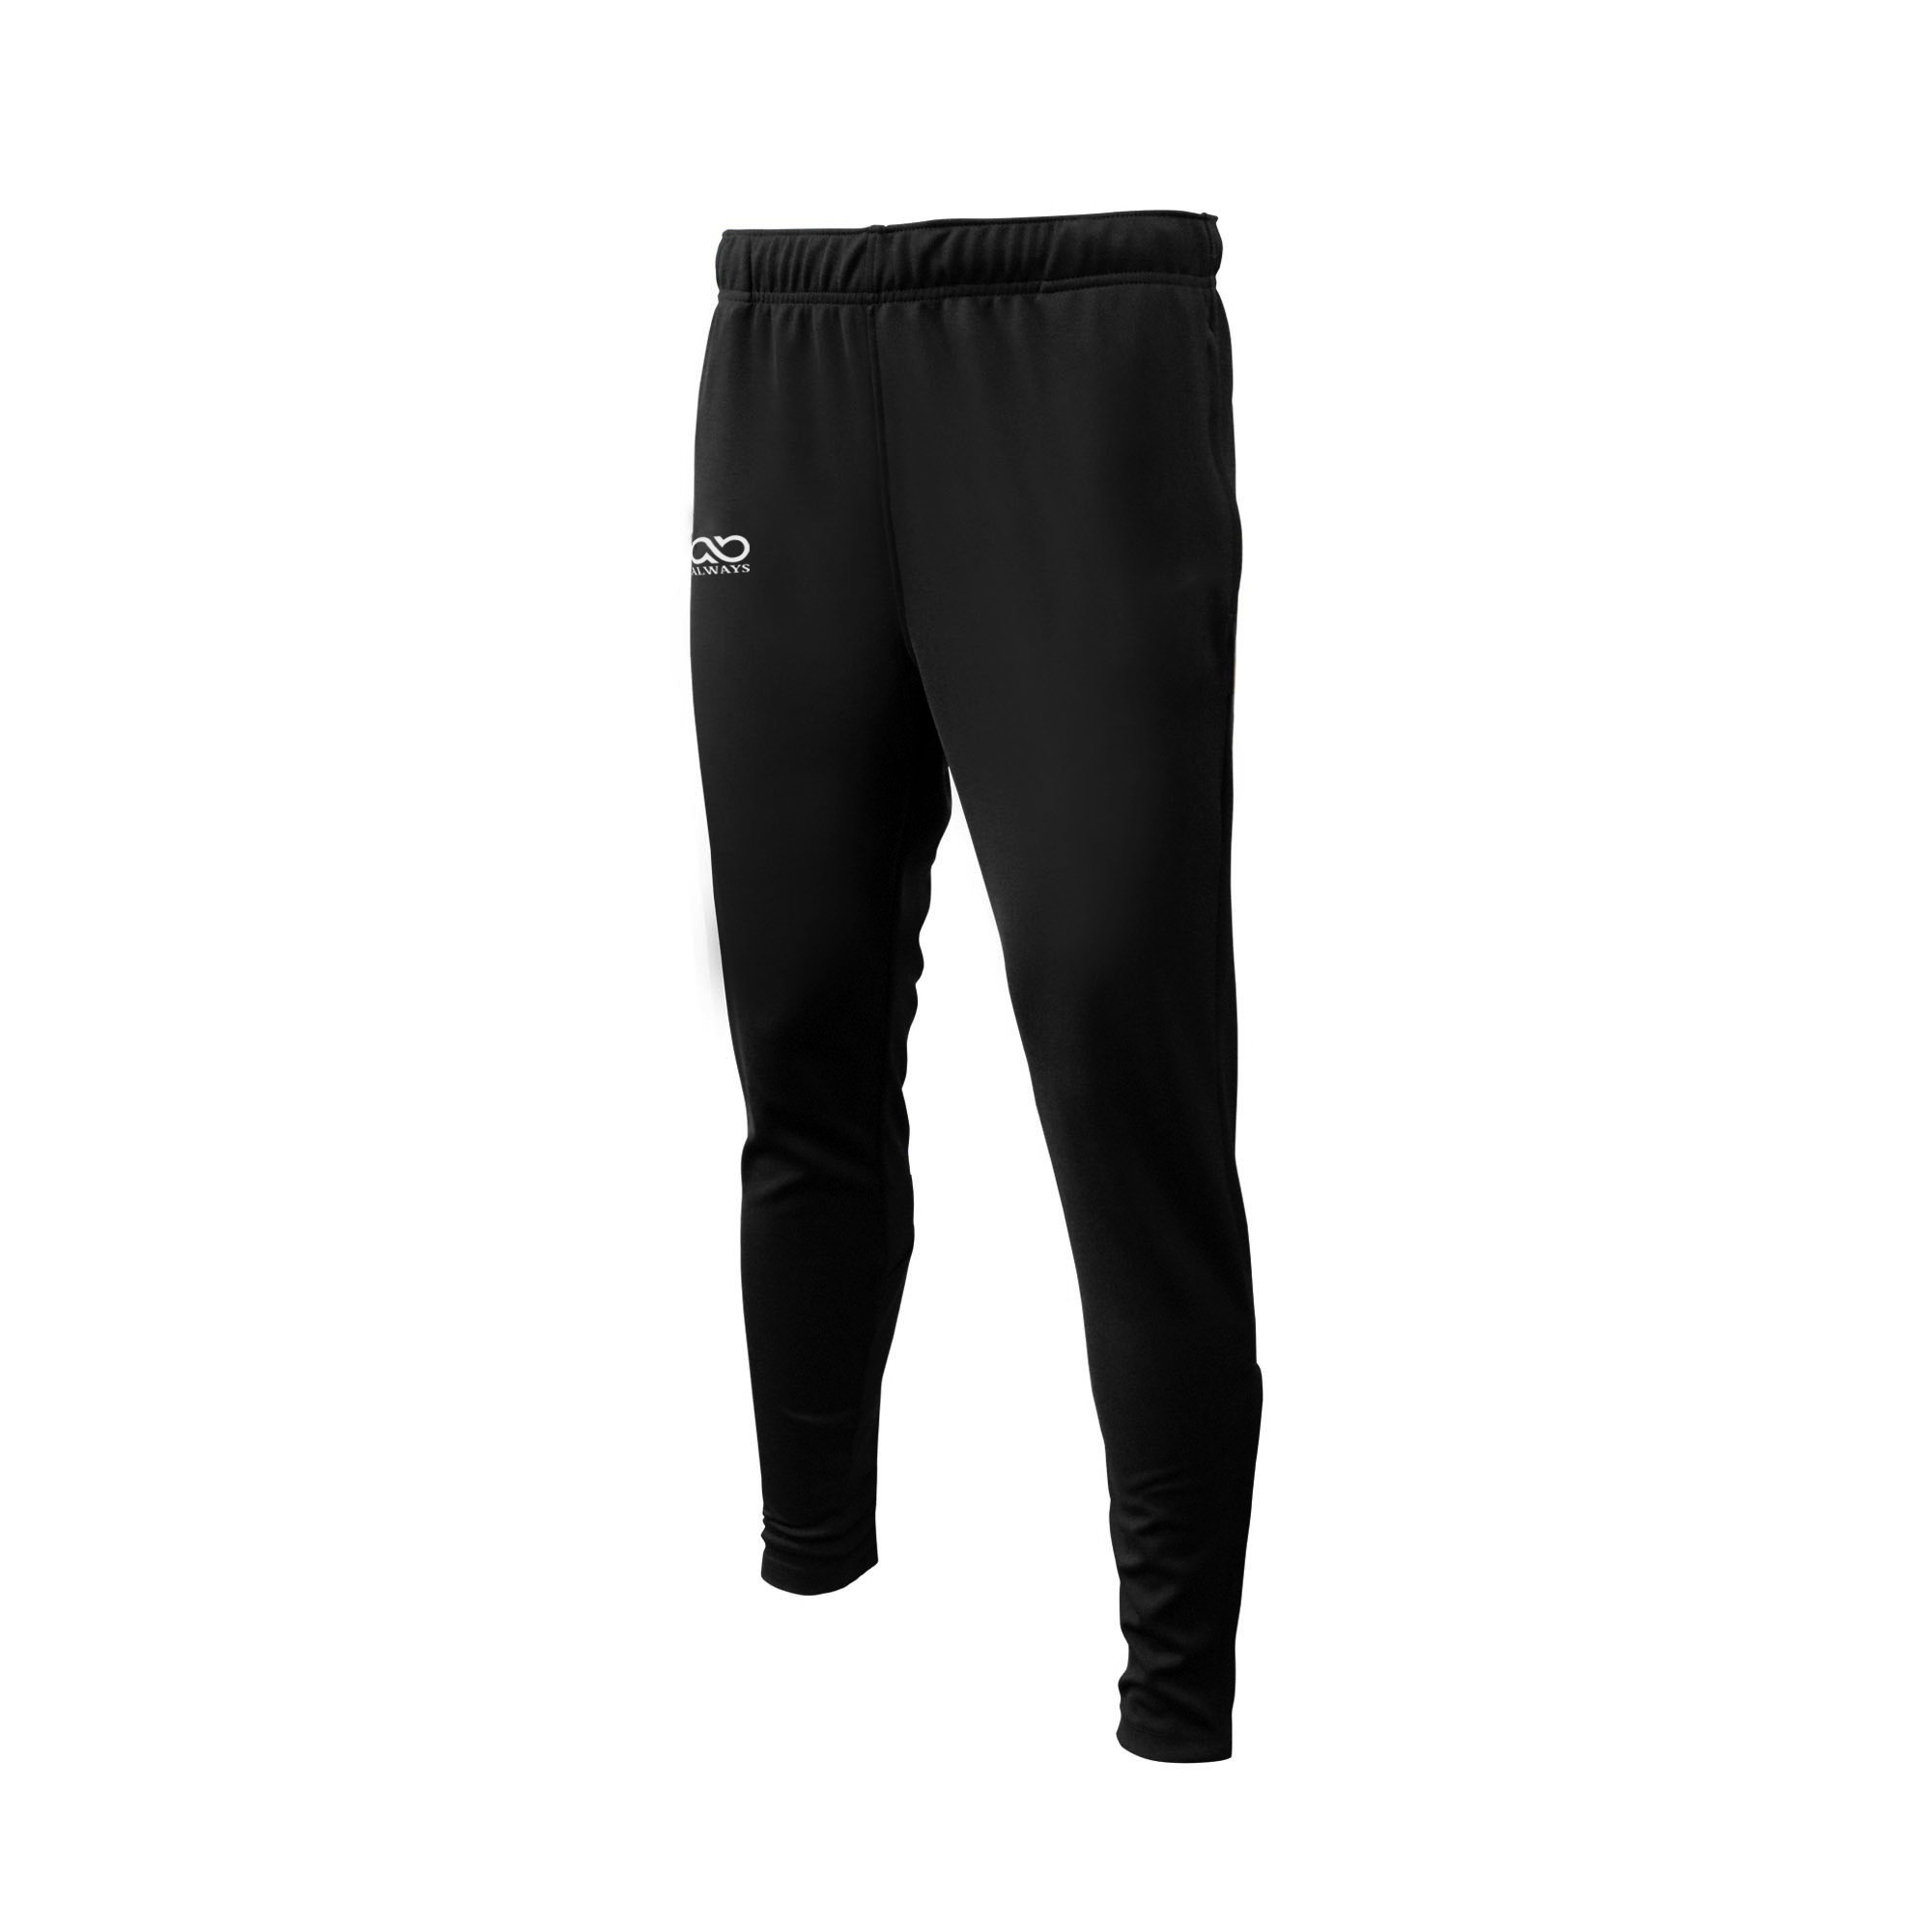 Training Leggings Archives - The AB Sports Clothing